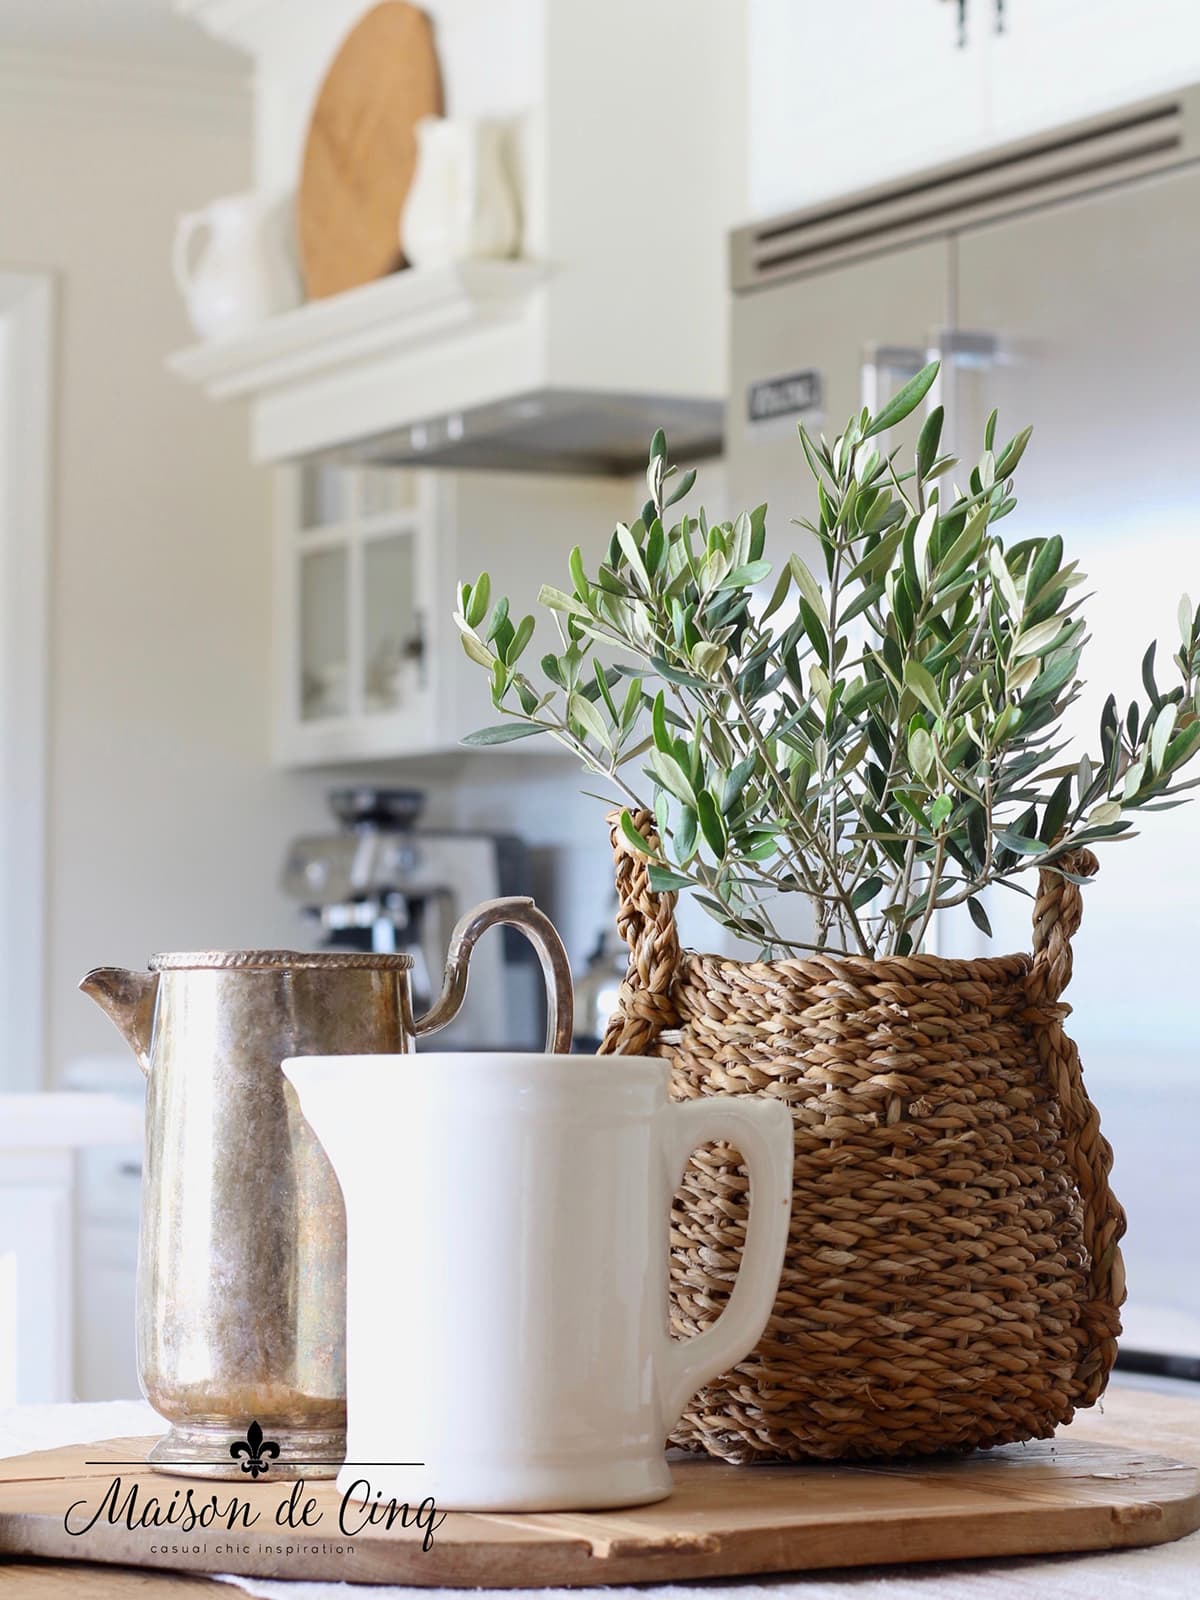 how to decorate with odd numbers vignette with olive plant, silver pitcher and vintage ironstone pitcher 